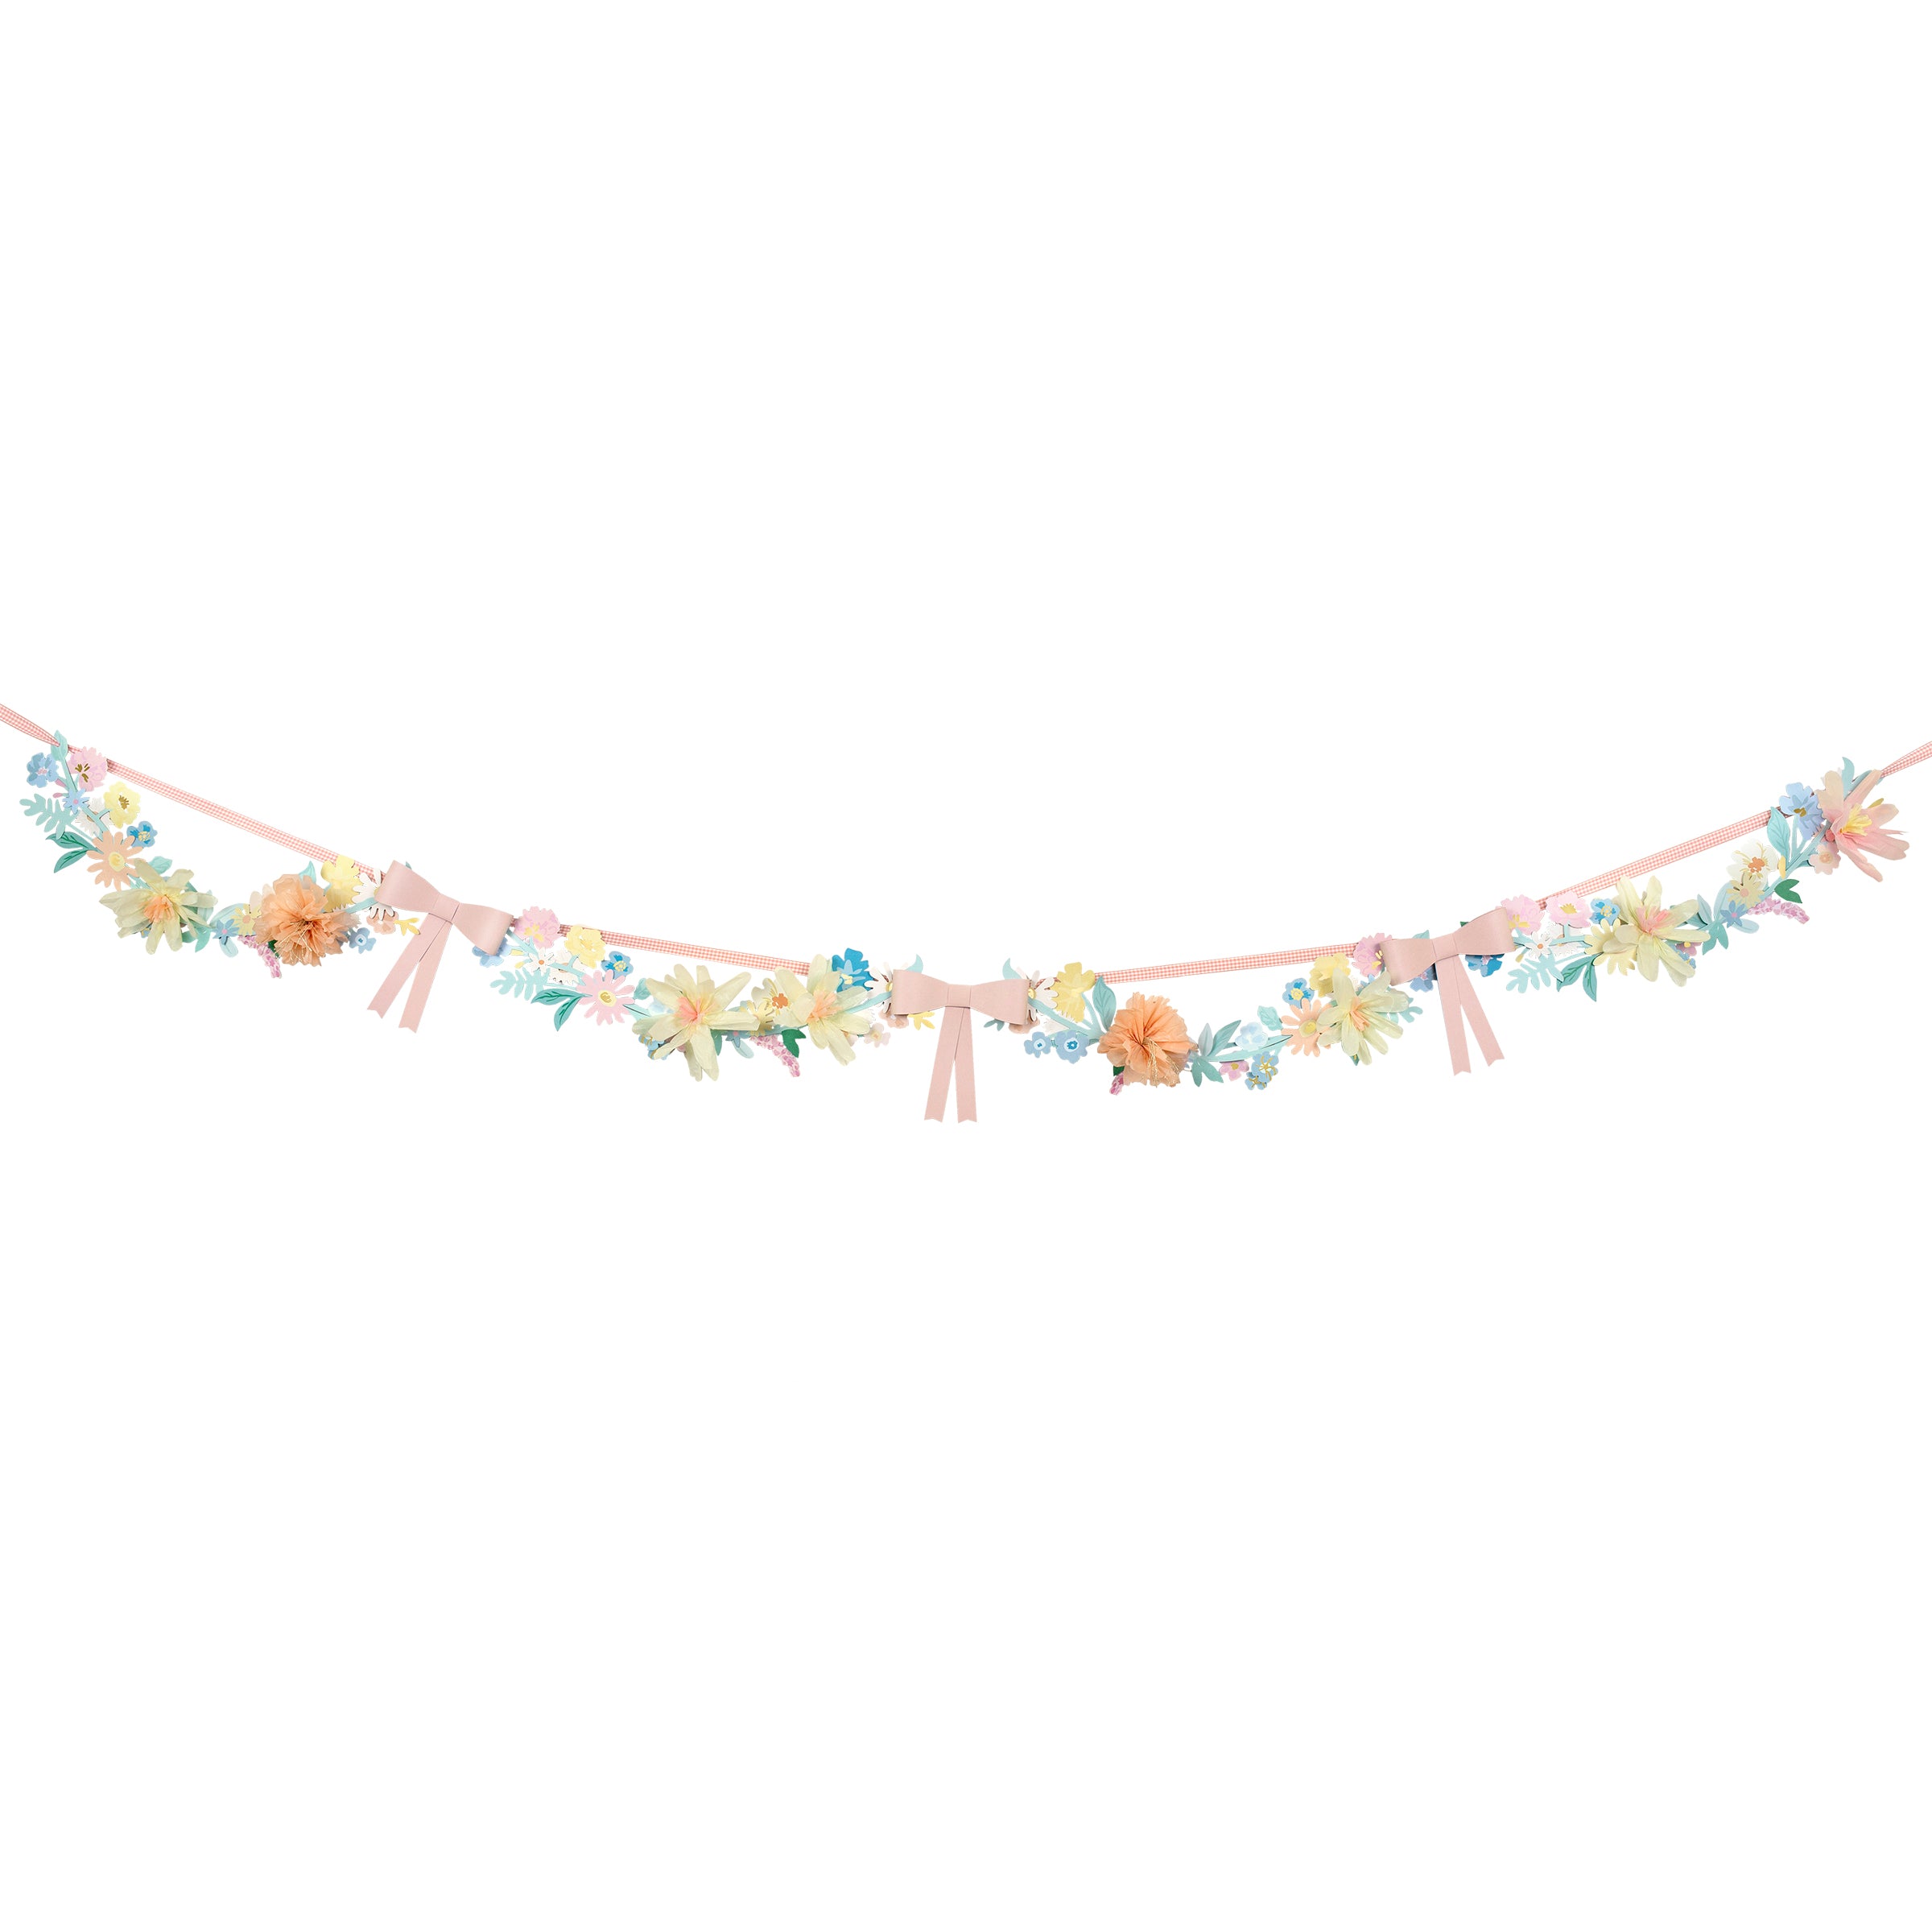 Our paper garland, featuring flowers and bows, is the perfect baby shower garland or Easter garland.